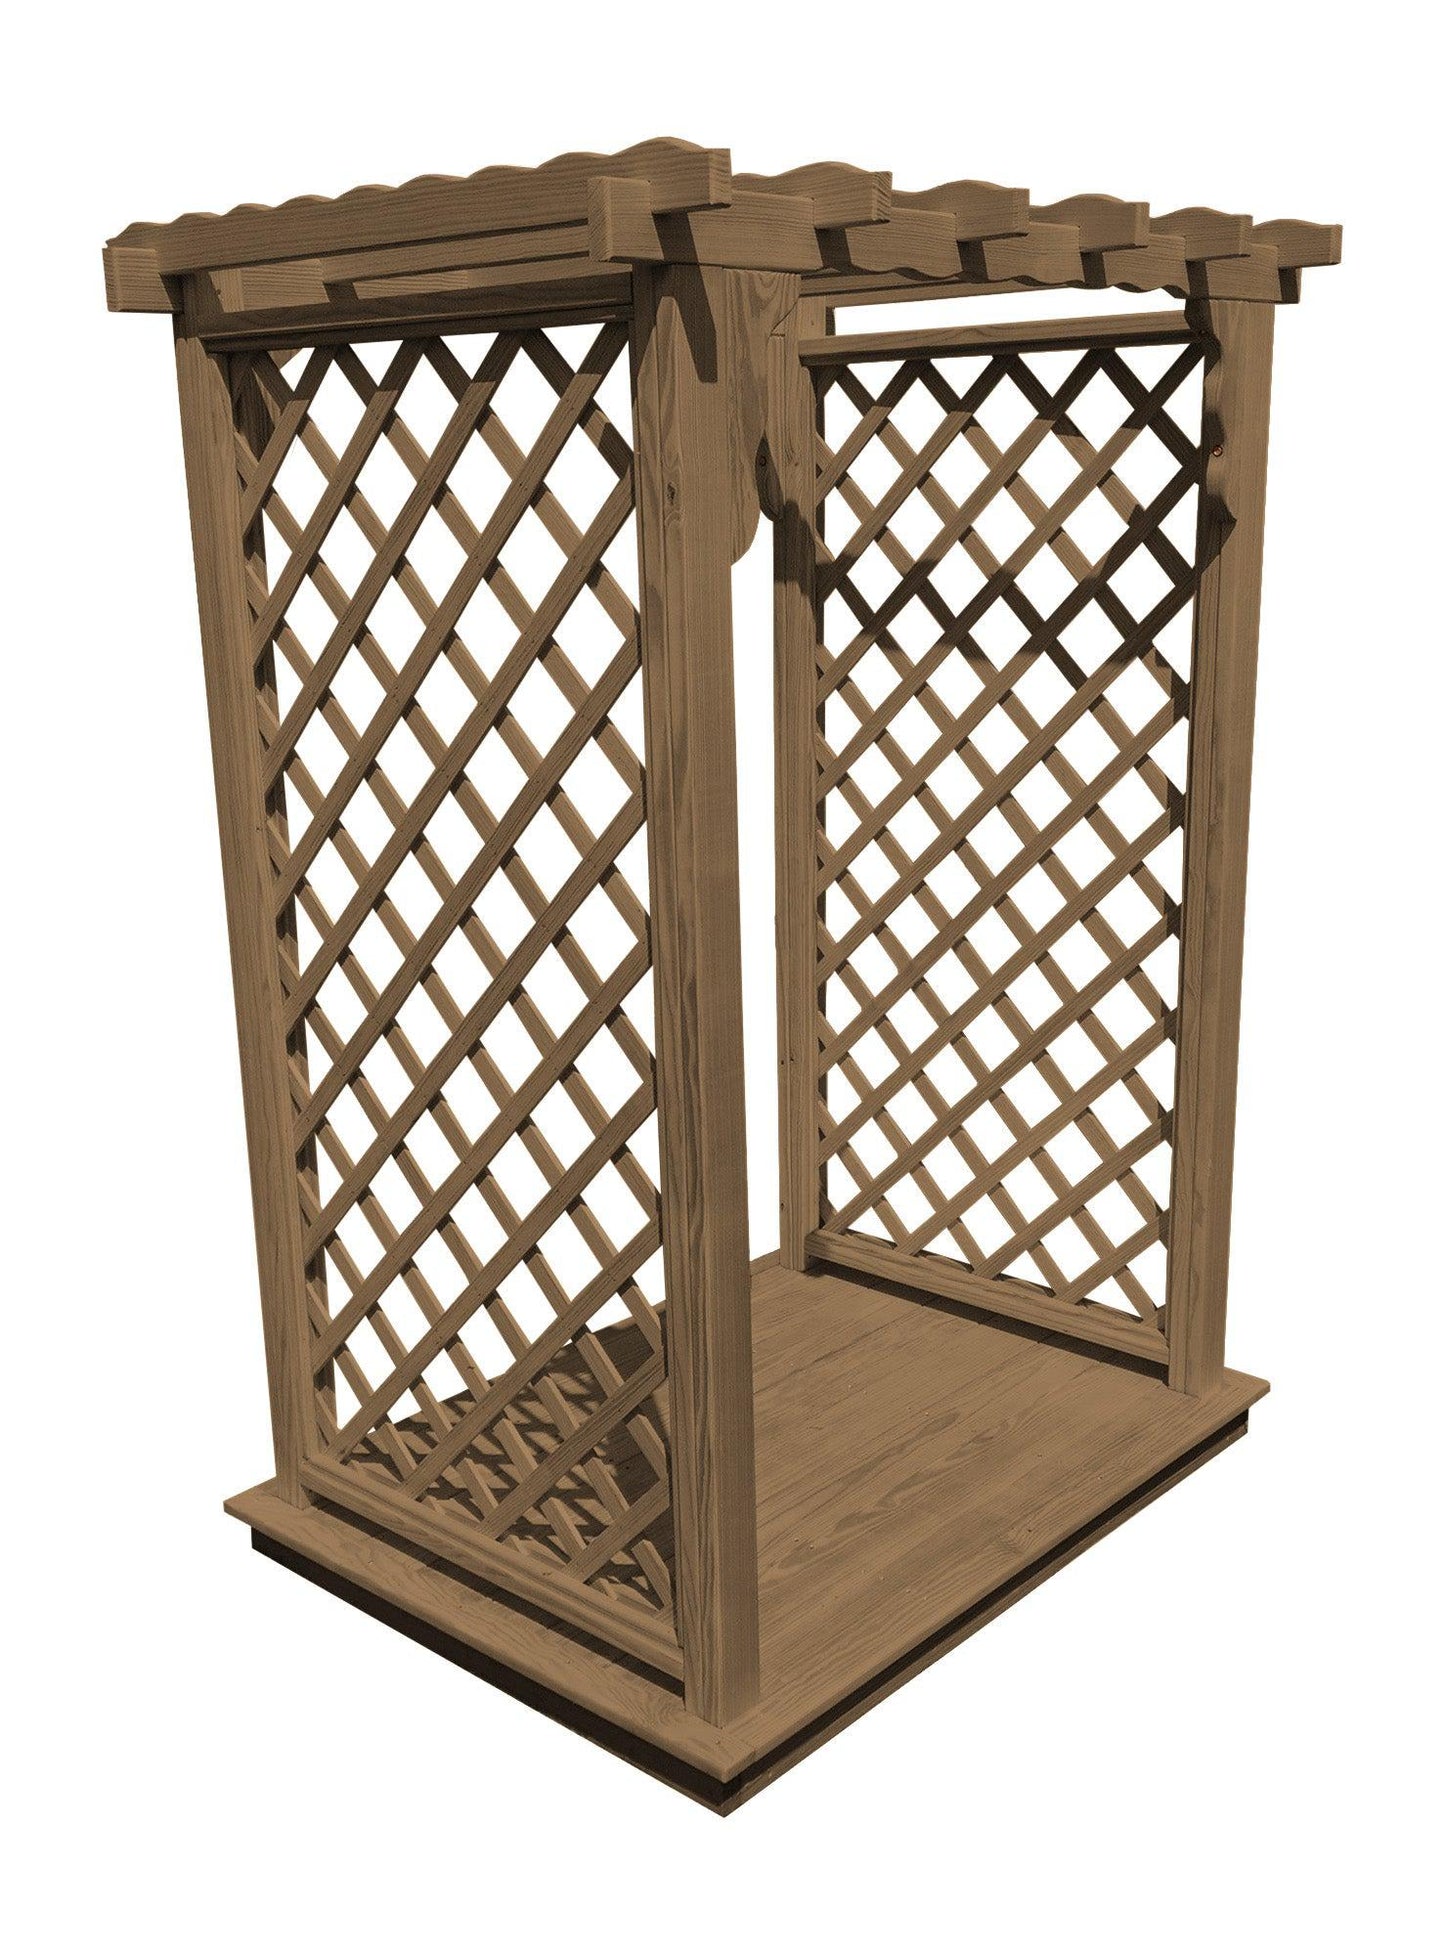 A&L FURNITURE CO. 5' Covington Pressure Treated Pine Arbor & Deck - LEAD TIME TO SHIP 10 BUSINESS DAYS